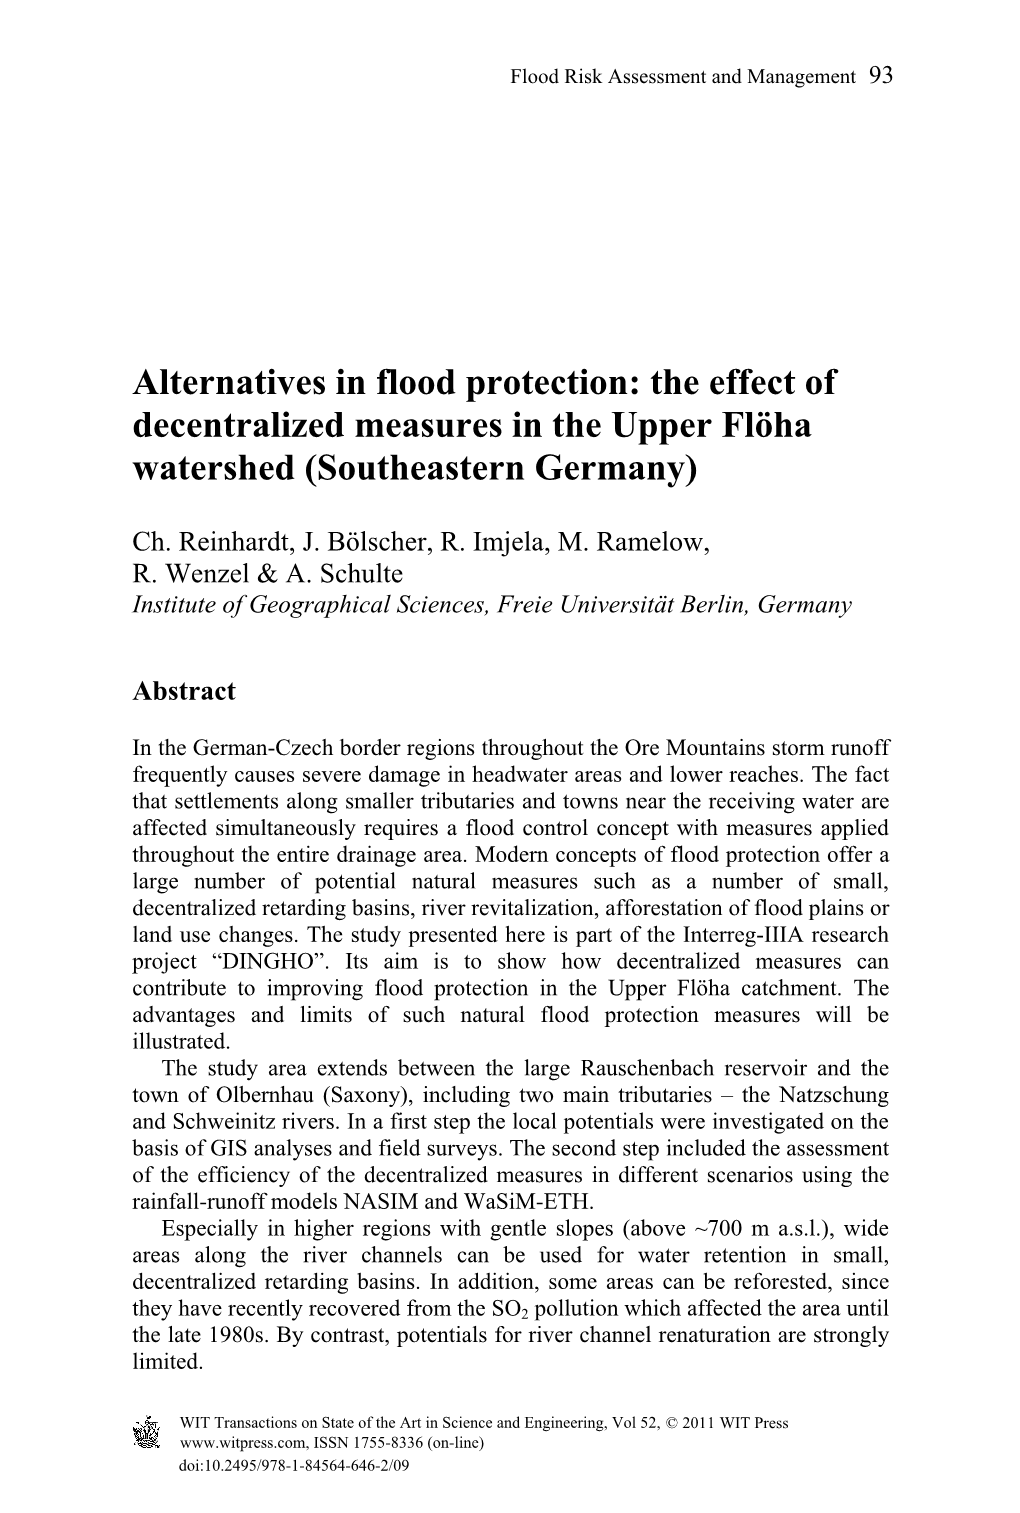 The Effect of Decentralized Measures in the Upper Flöha Watershed (Southeastern Germany)